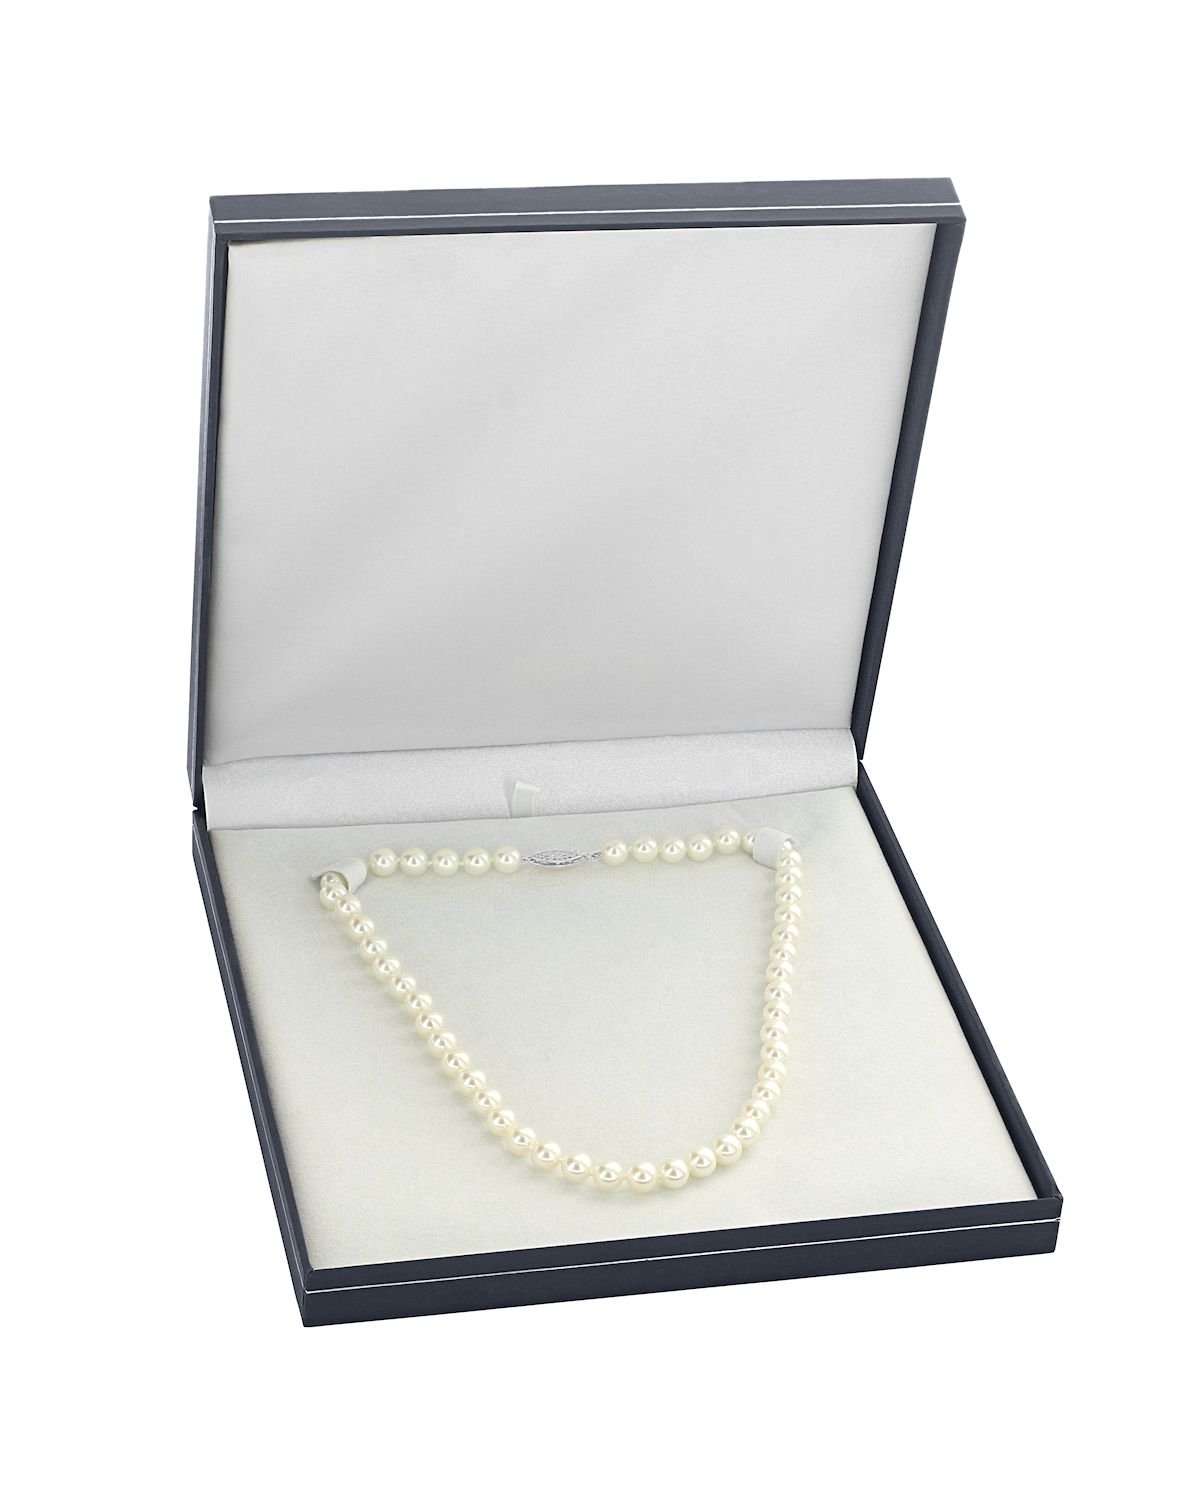 5.0-5.5mm Japanese Akoya White Pearl Necklace- AA+ Quality - Fourth Image